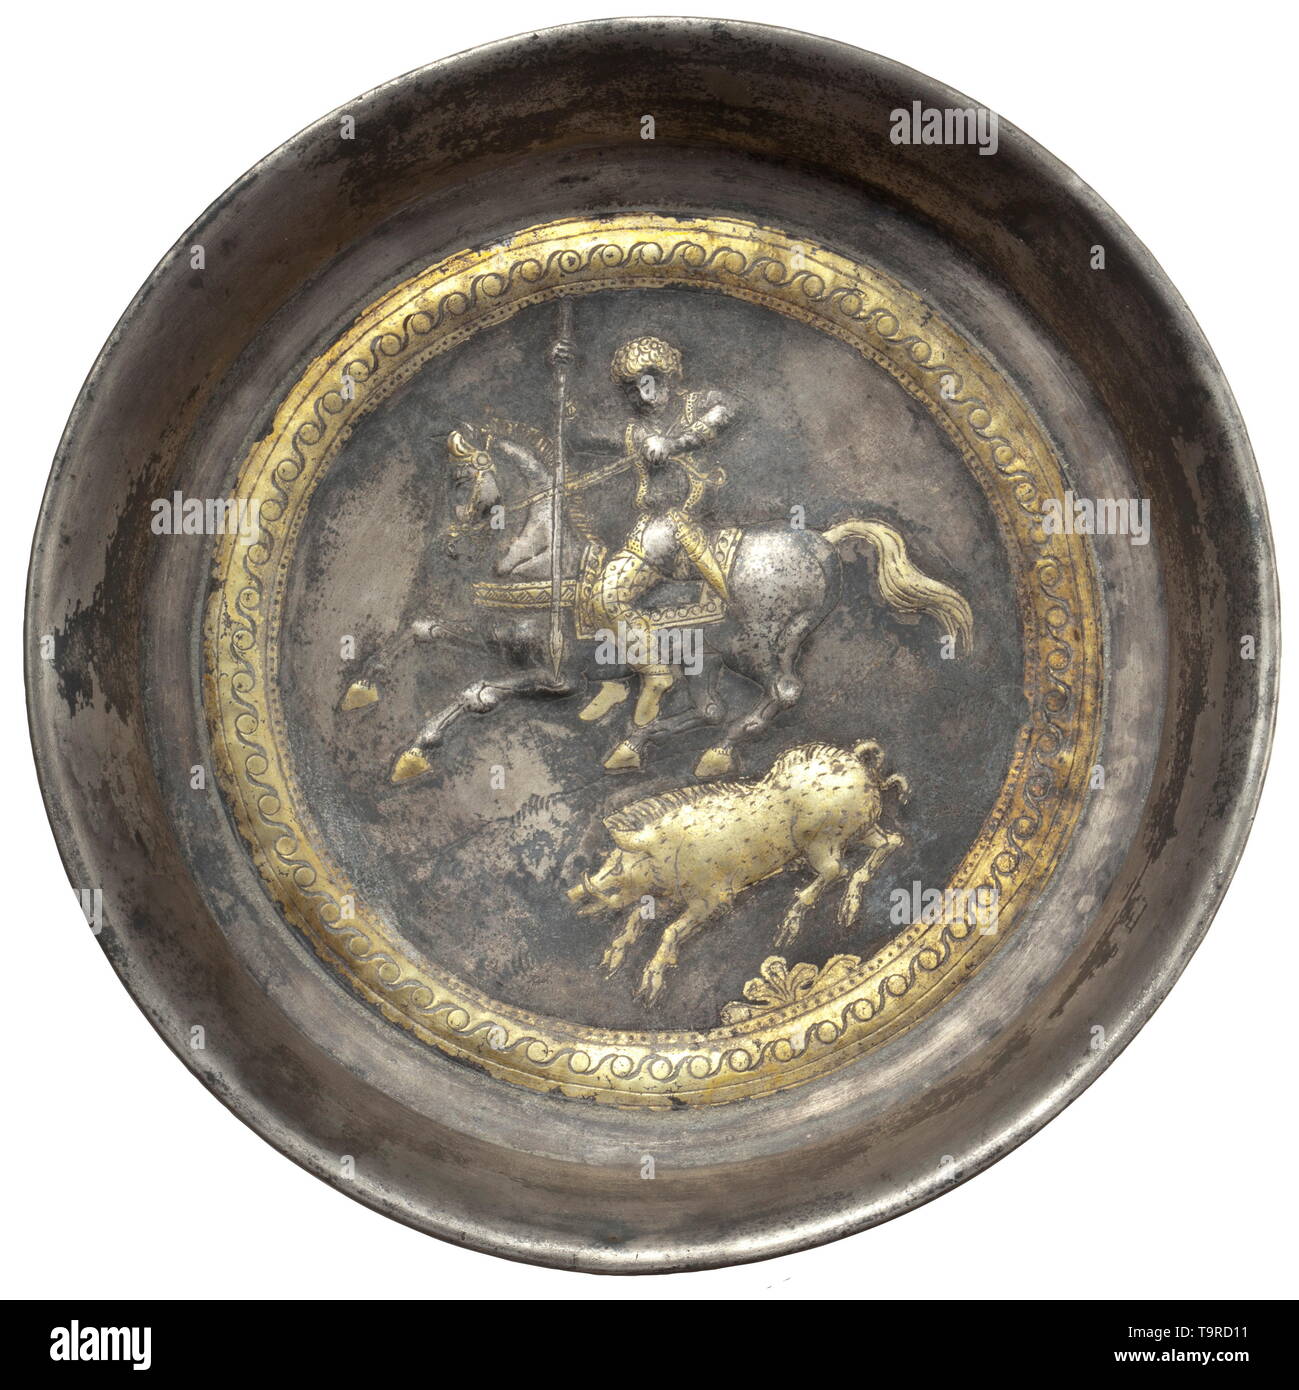 A late Scythian/early Sarmatian steppe-nomadic silver bowl with a hunting scene, late 4th - 3rd century BC Bowl worked in two p ancient world, Additional-Rights-Clearance-Info-Not-Available Stock Photo